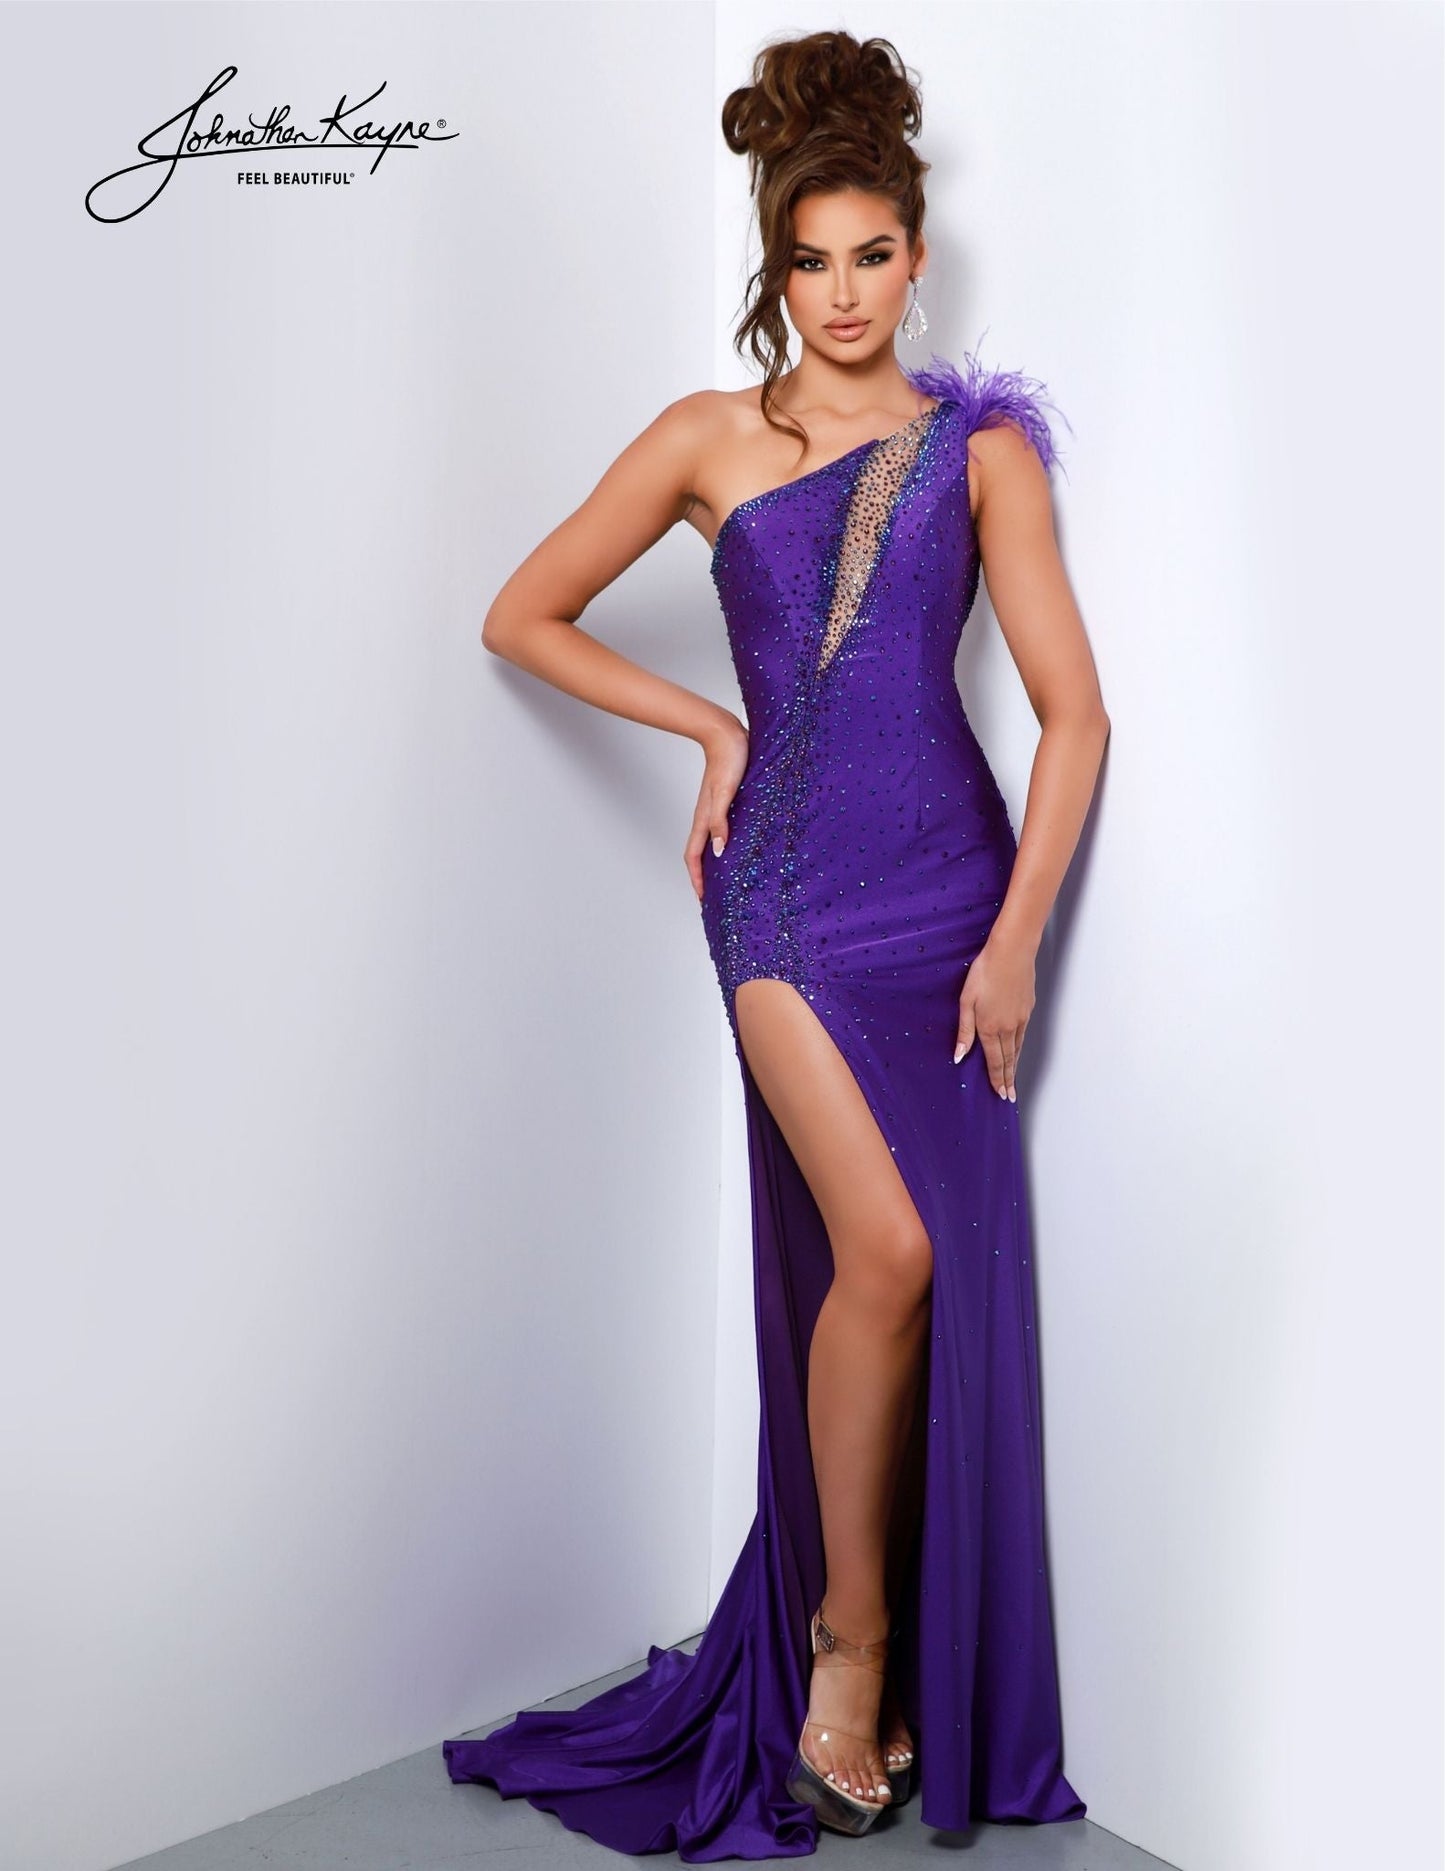 The Johnathan Kayne 2810 Long Prom Dress exudes elegance with its fitted one-shoulder style, intricate feathered accents, and dramatic maxi slit. Stylish and sophisticated, this formal gown is sure to make a lasting impression. Let your inner diva shine bright in this 4 Way Stretch Lycra gown. This dress will ensure that all eyes are on you as you make a grand entrance.